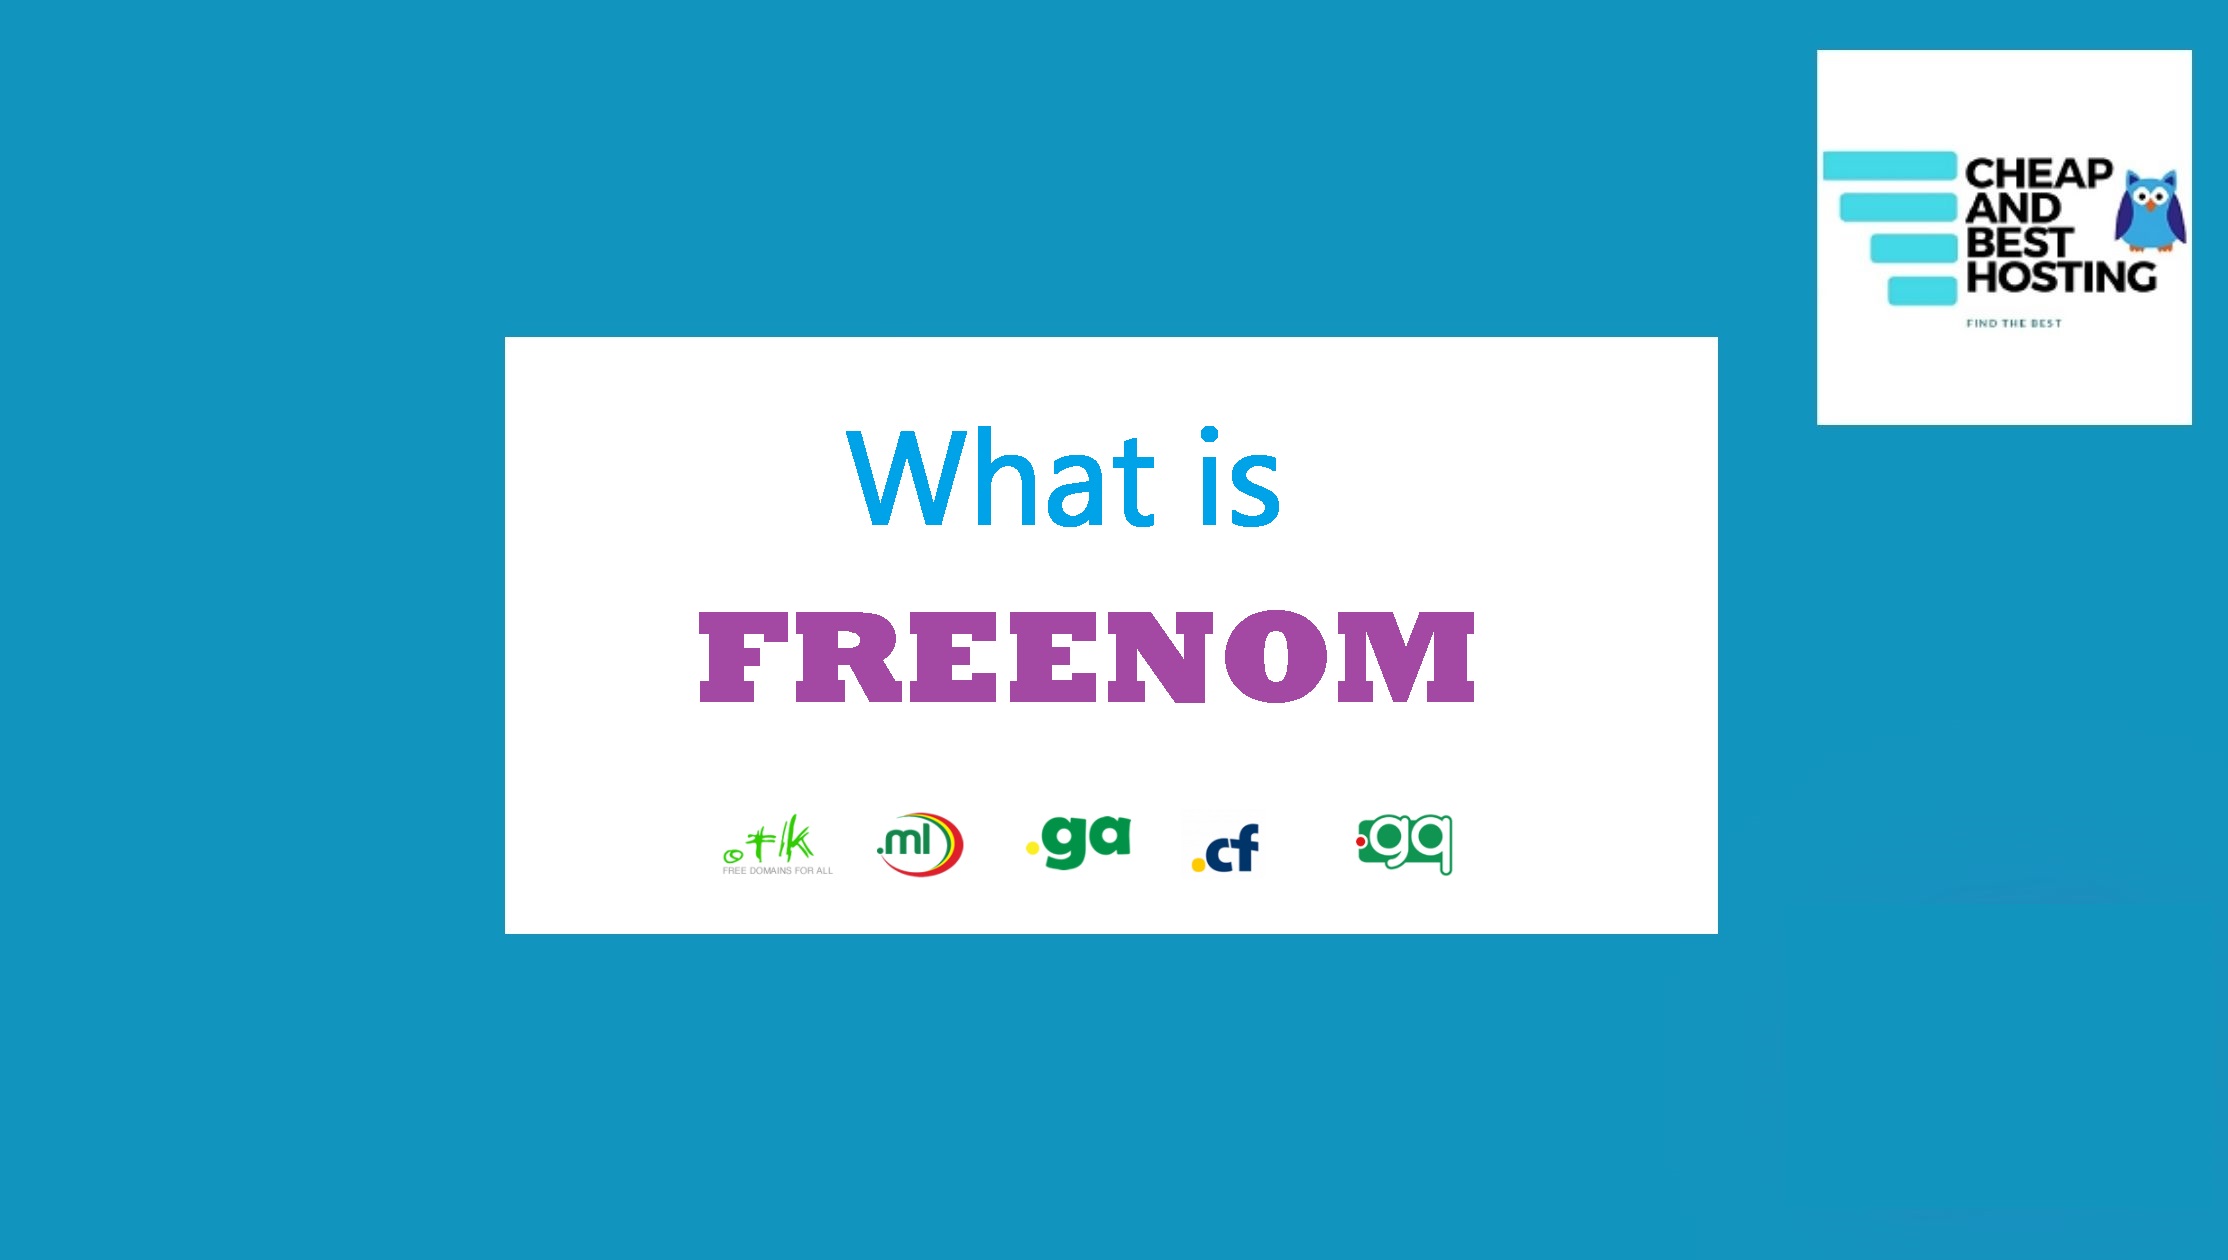 WHAT IS FREENOM AND HOW TO BOOK FREE DOMAIN WITH FREENOM